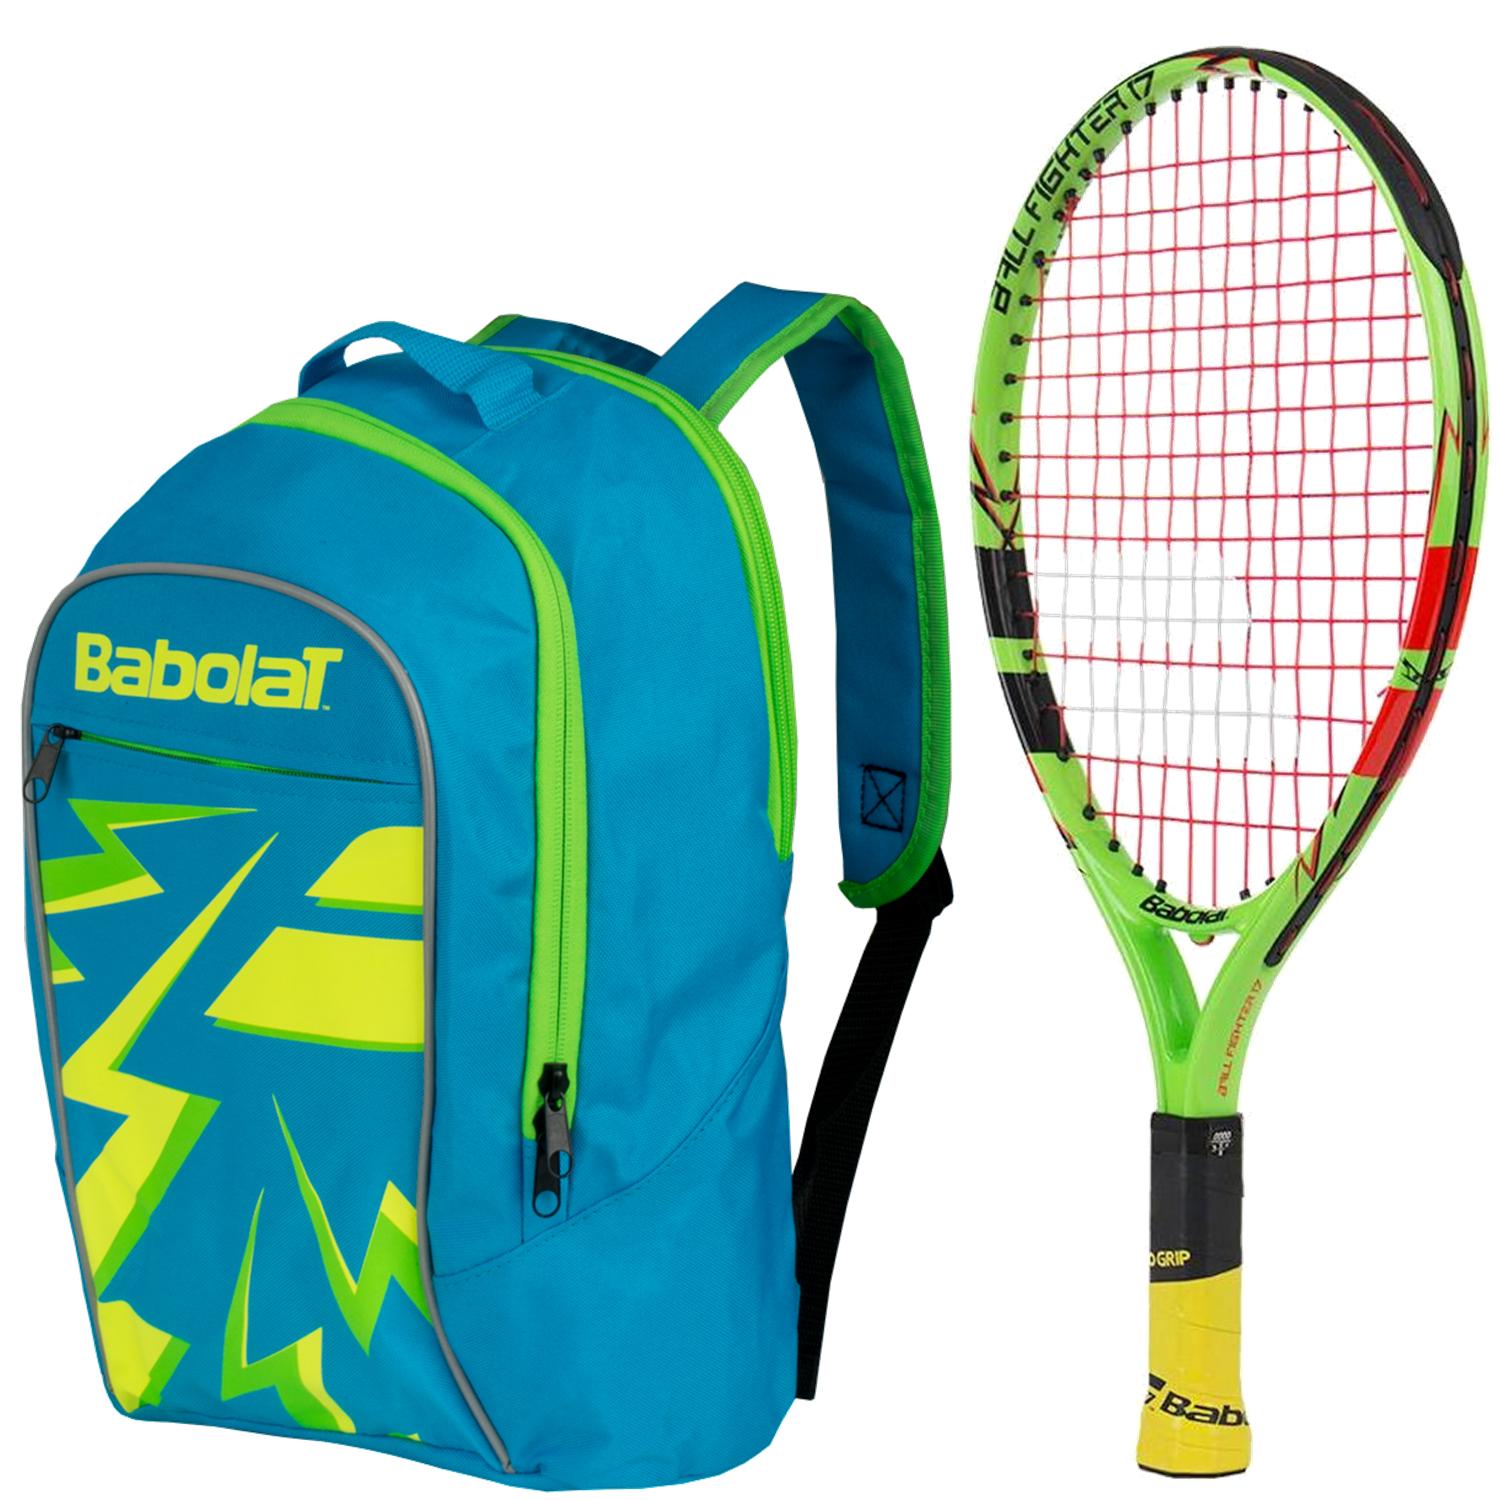 Babolat Ballfighter 17 Inch Child&amp;apos;s Tennis Racquet with a Blue Junior Tennis Backpack